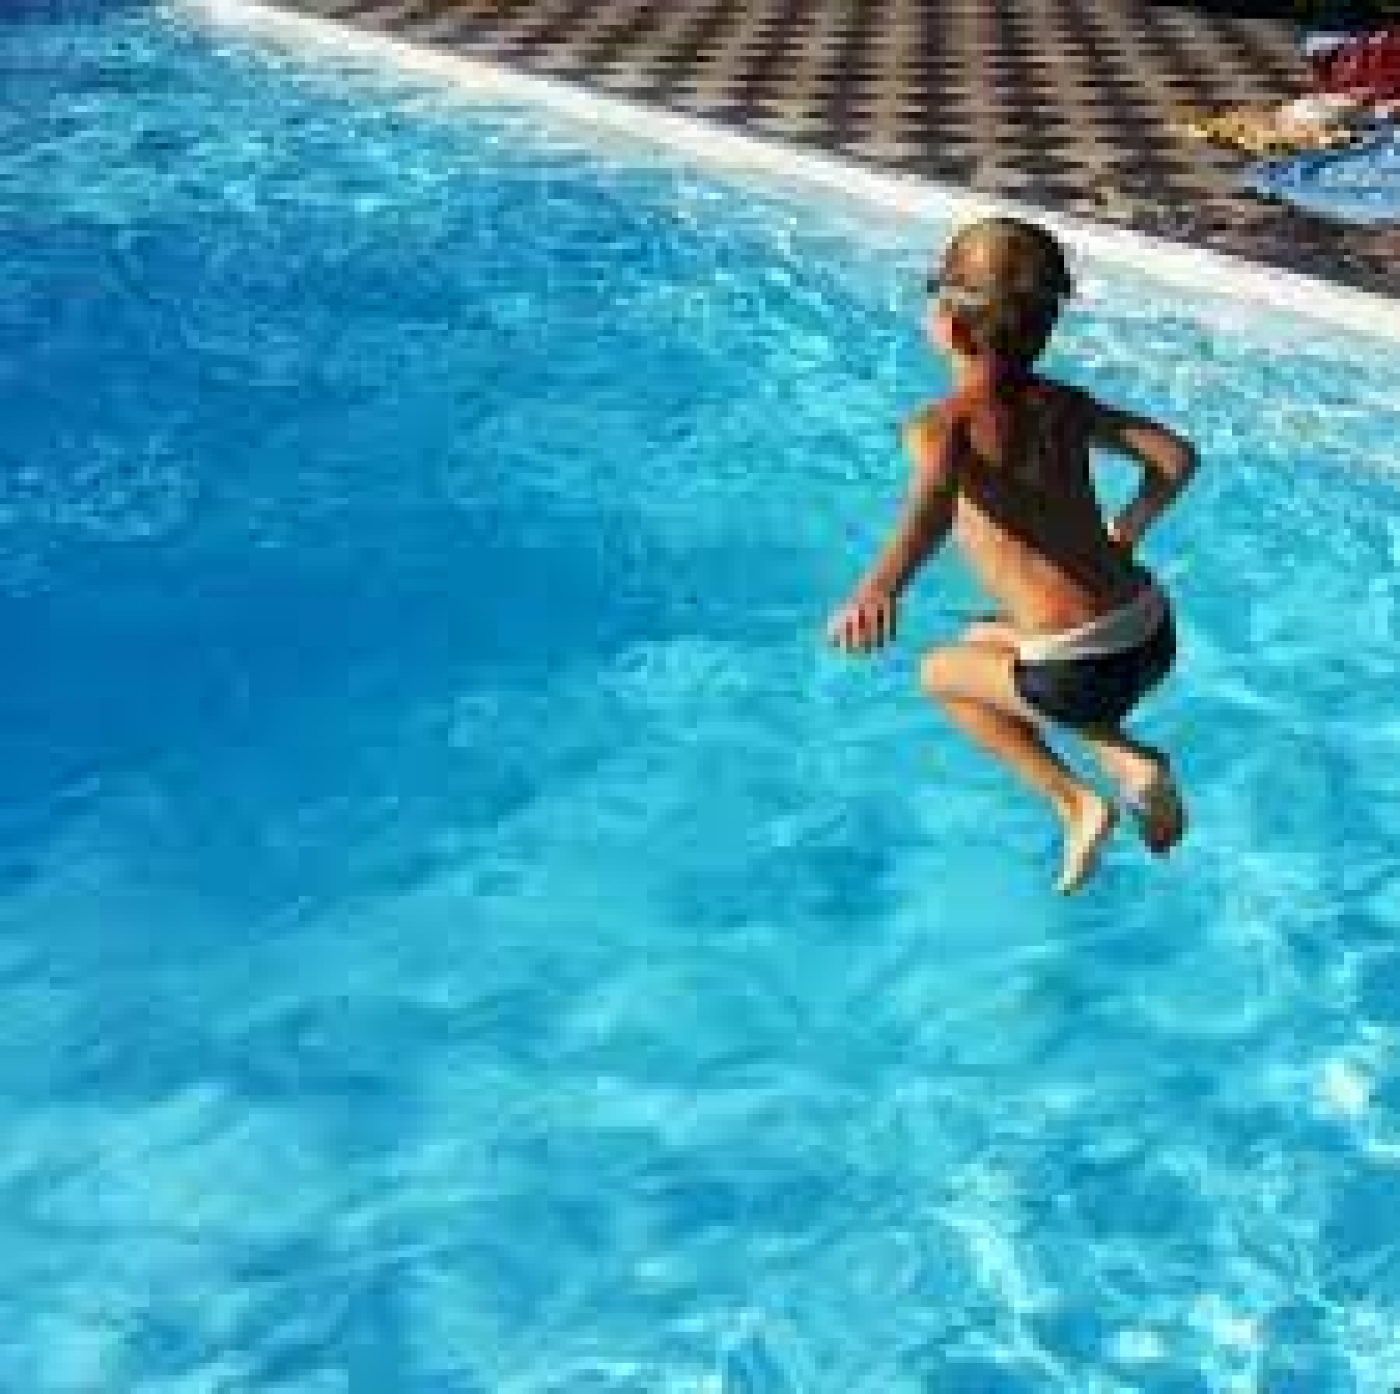 Children under five more at risk of drowning, WHO warns